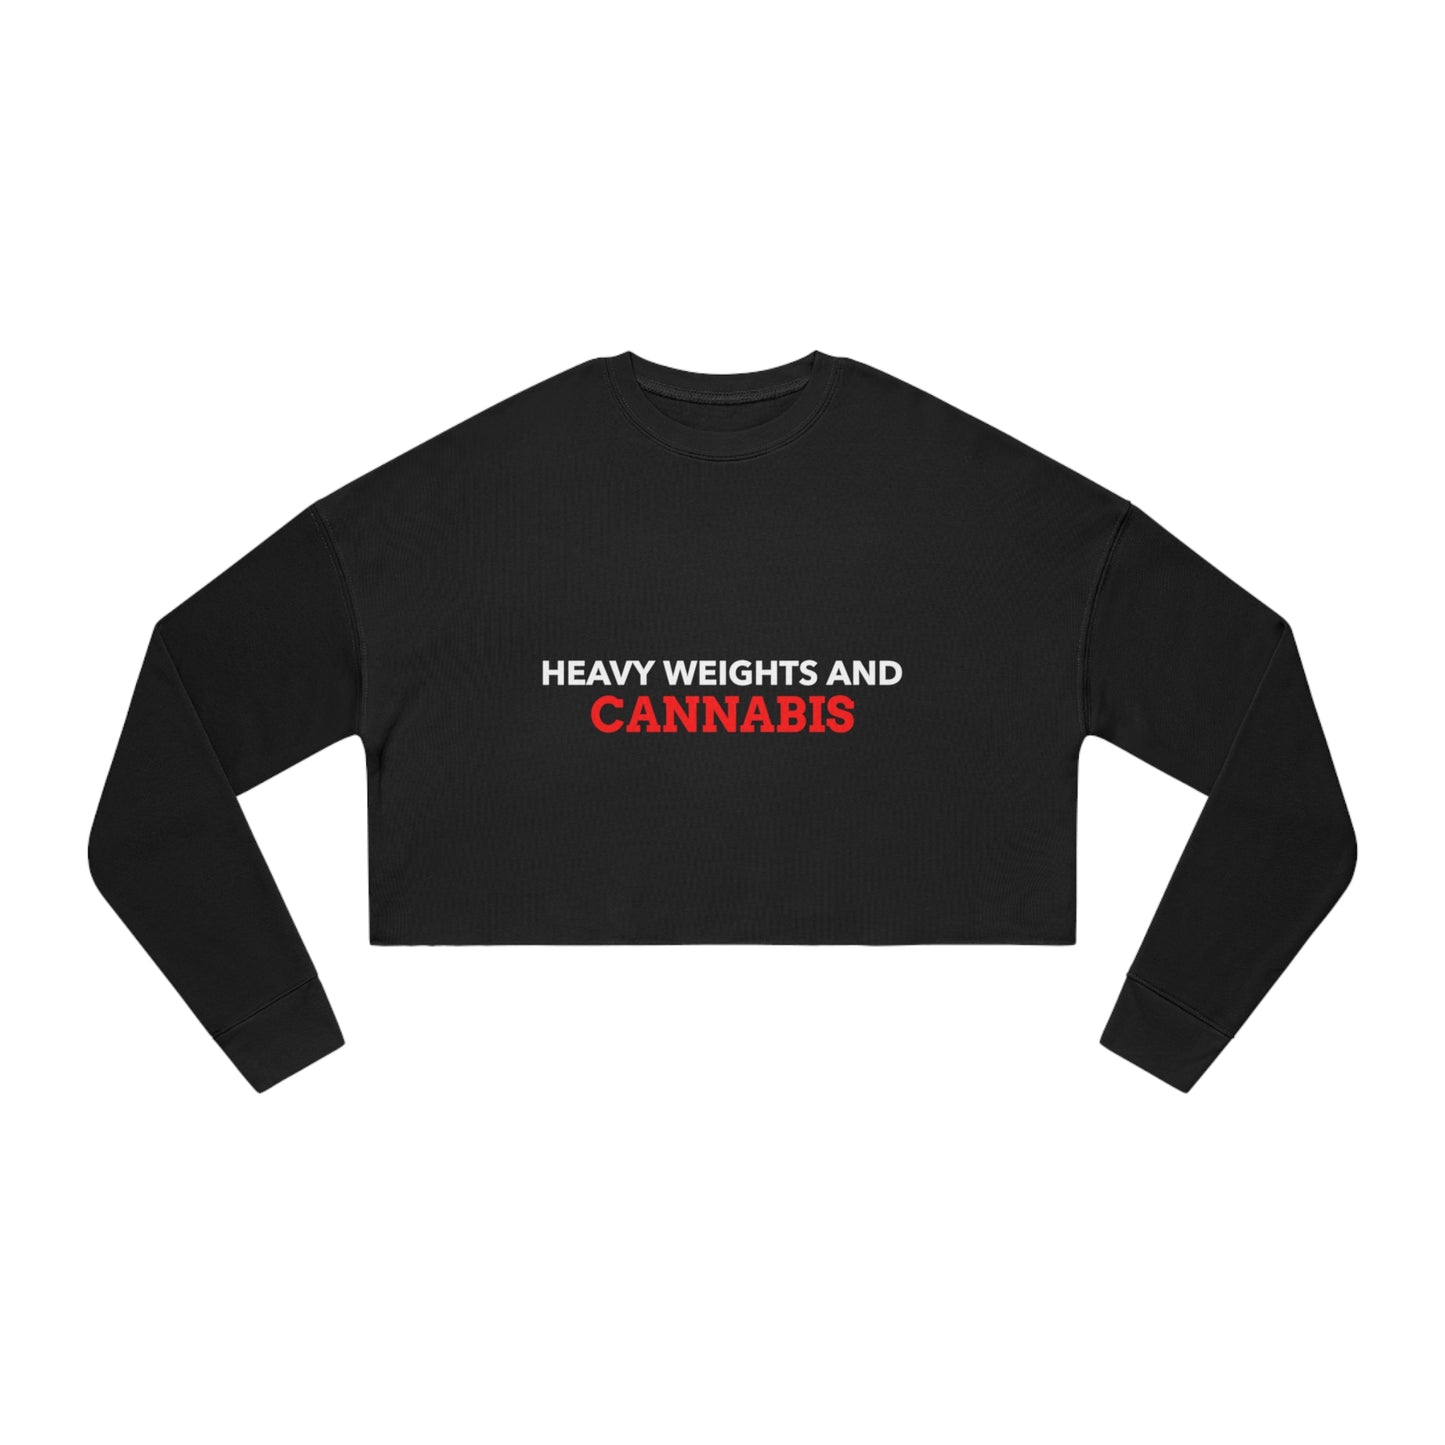 Women's Heavy Weights and Cannabis Cropped Sweatshirt